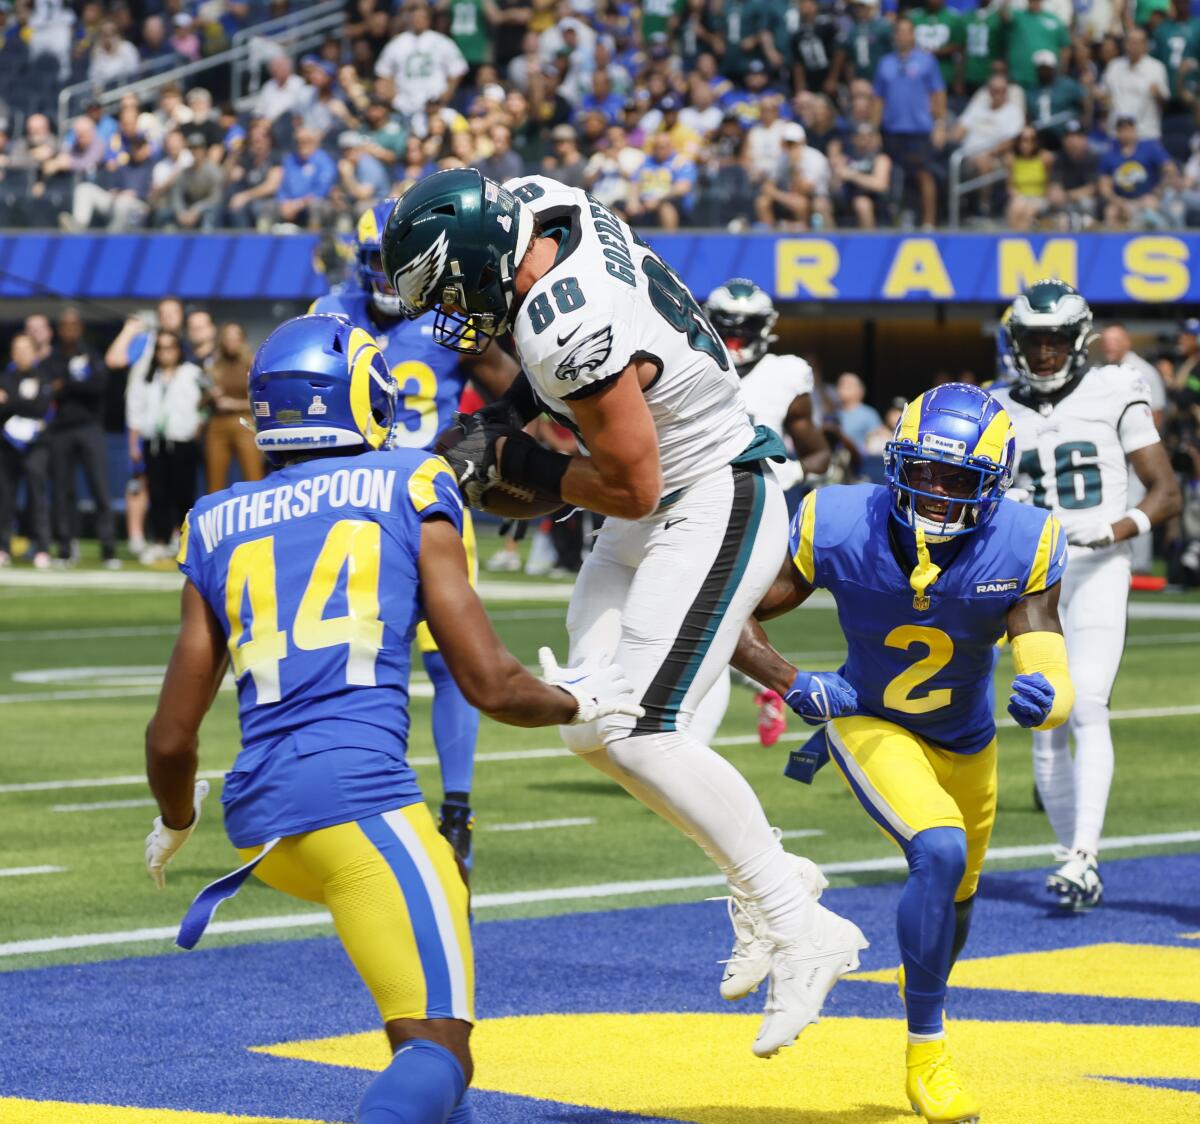 Eagles tight end Dallas Goedert catches a touchdown pass from Jalen Hurts during the first quarter.